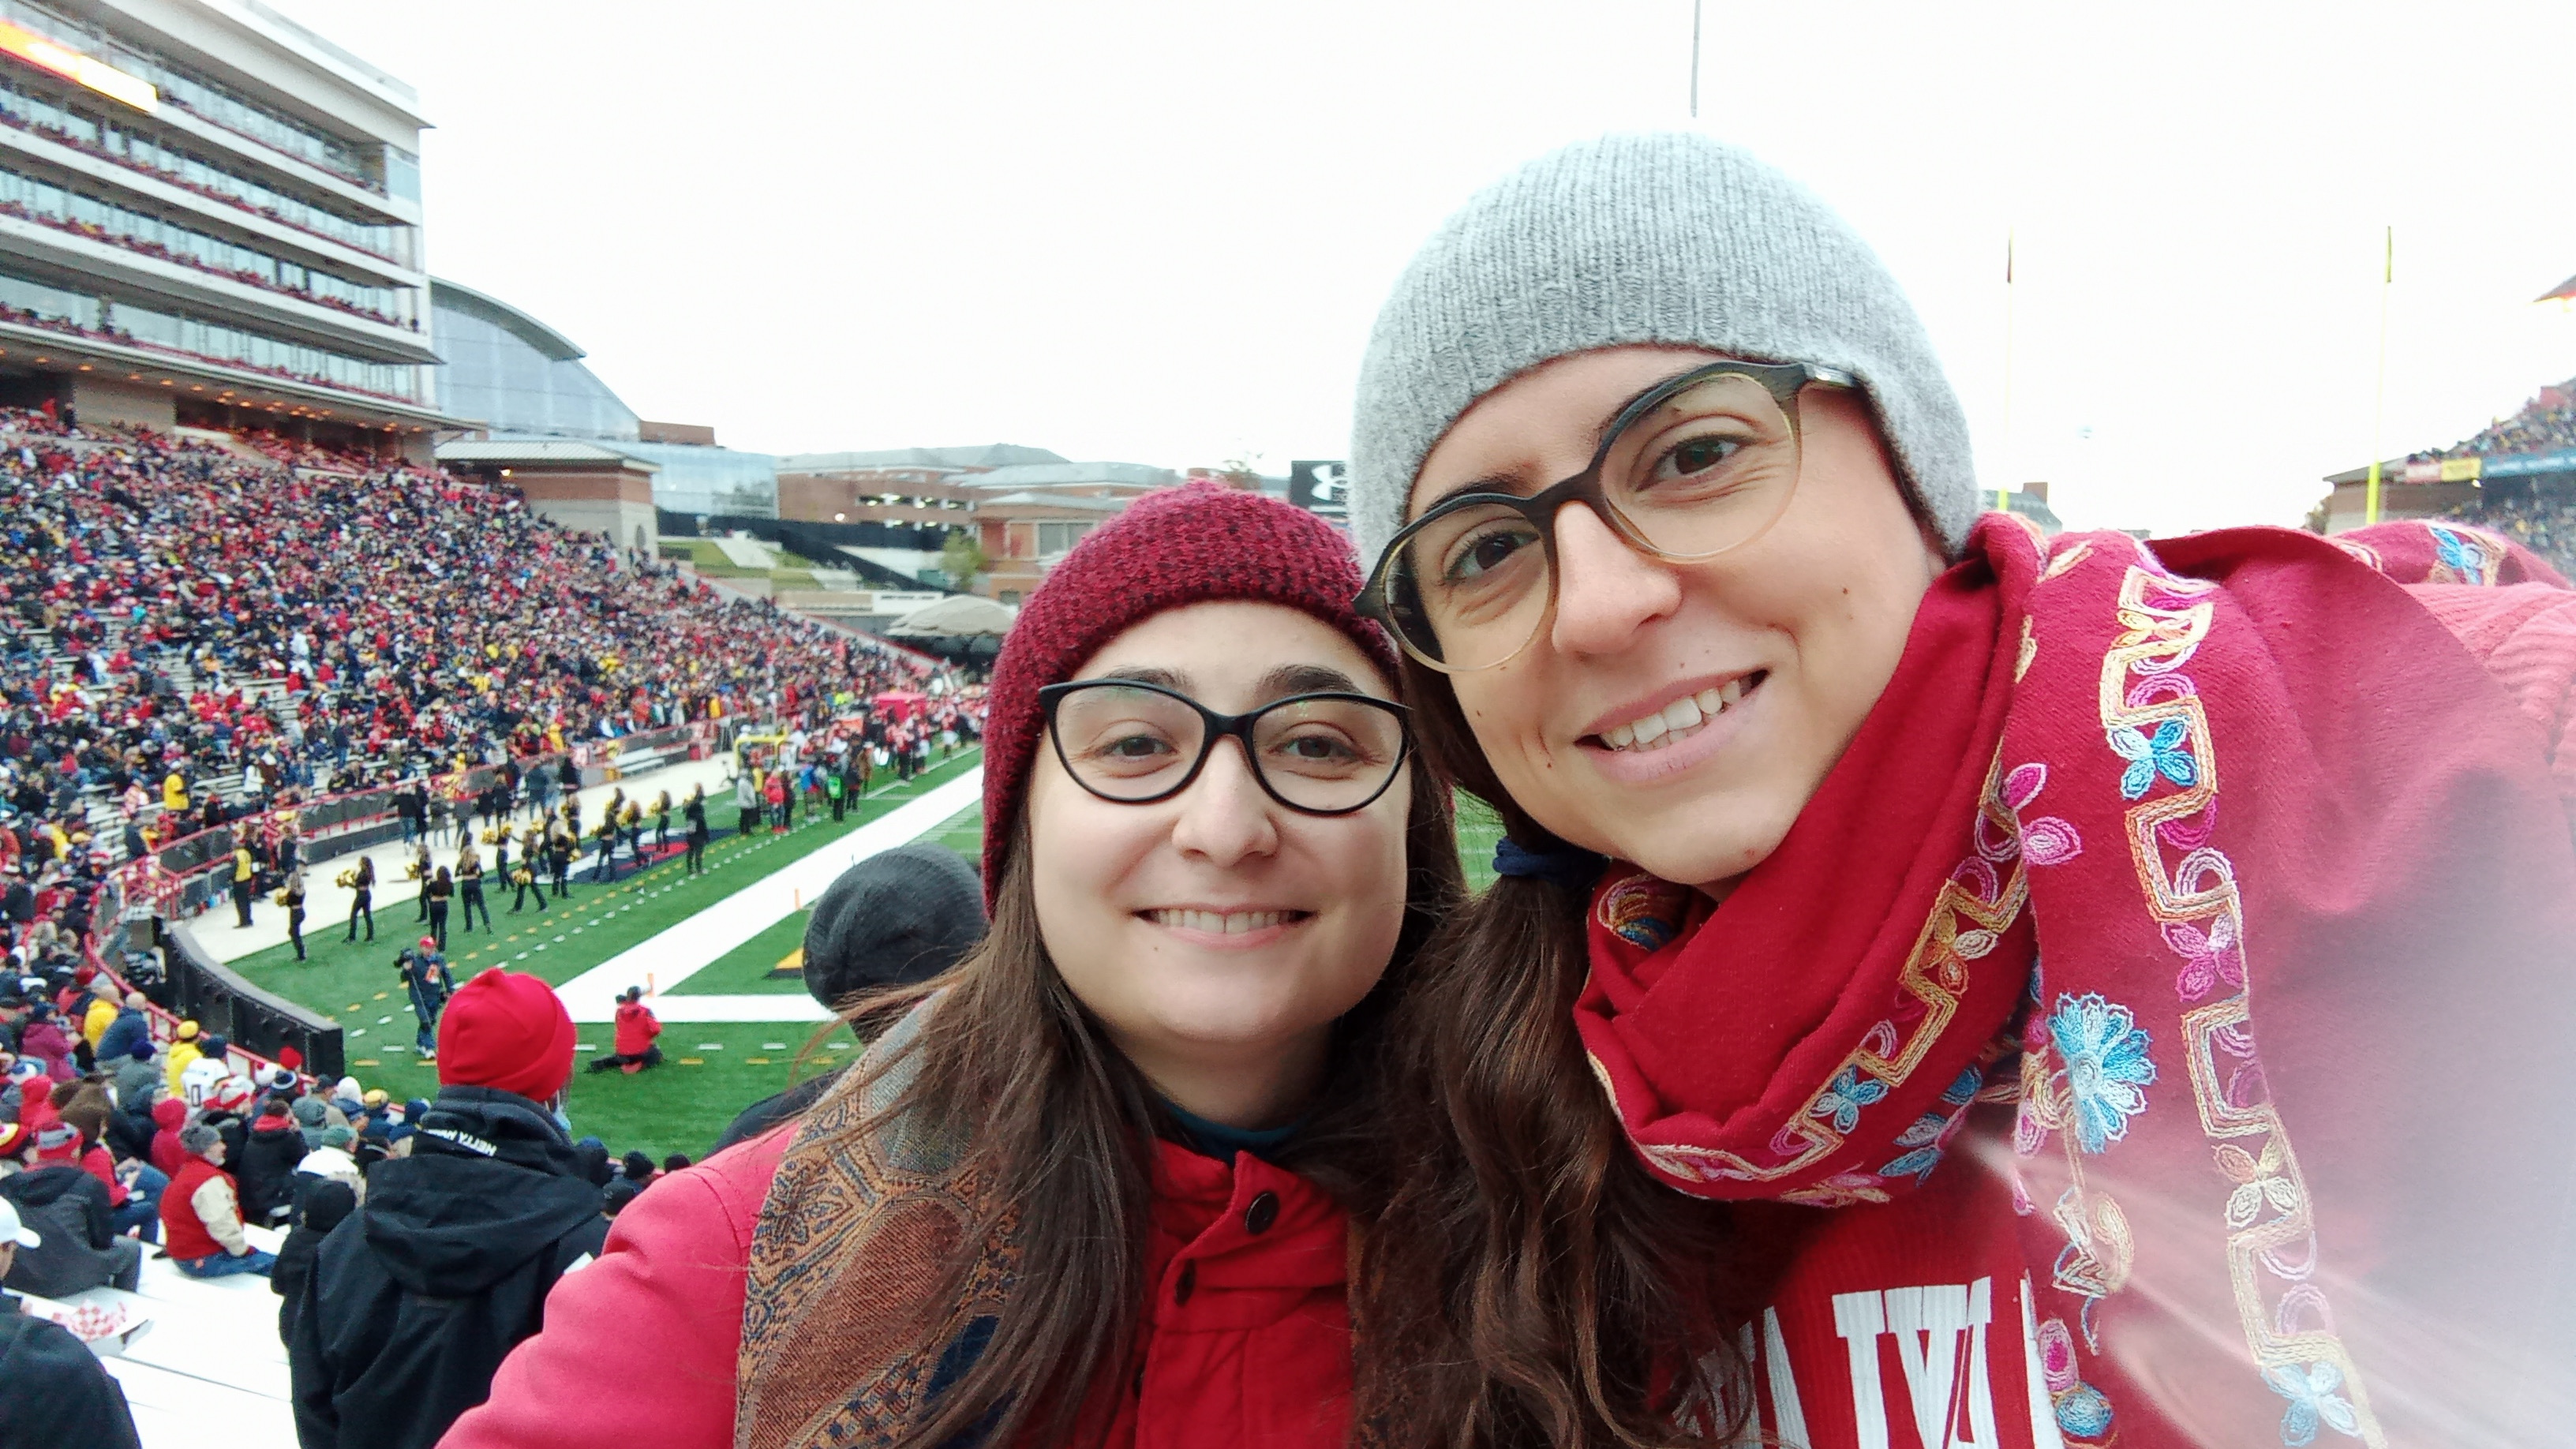 Clara Cuonzo and Luisa Seguin, two PhD students in Linguistics, taking a joint selfie at their first football game, both wearing read, standing behind the endzone at the Maryland stadium,